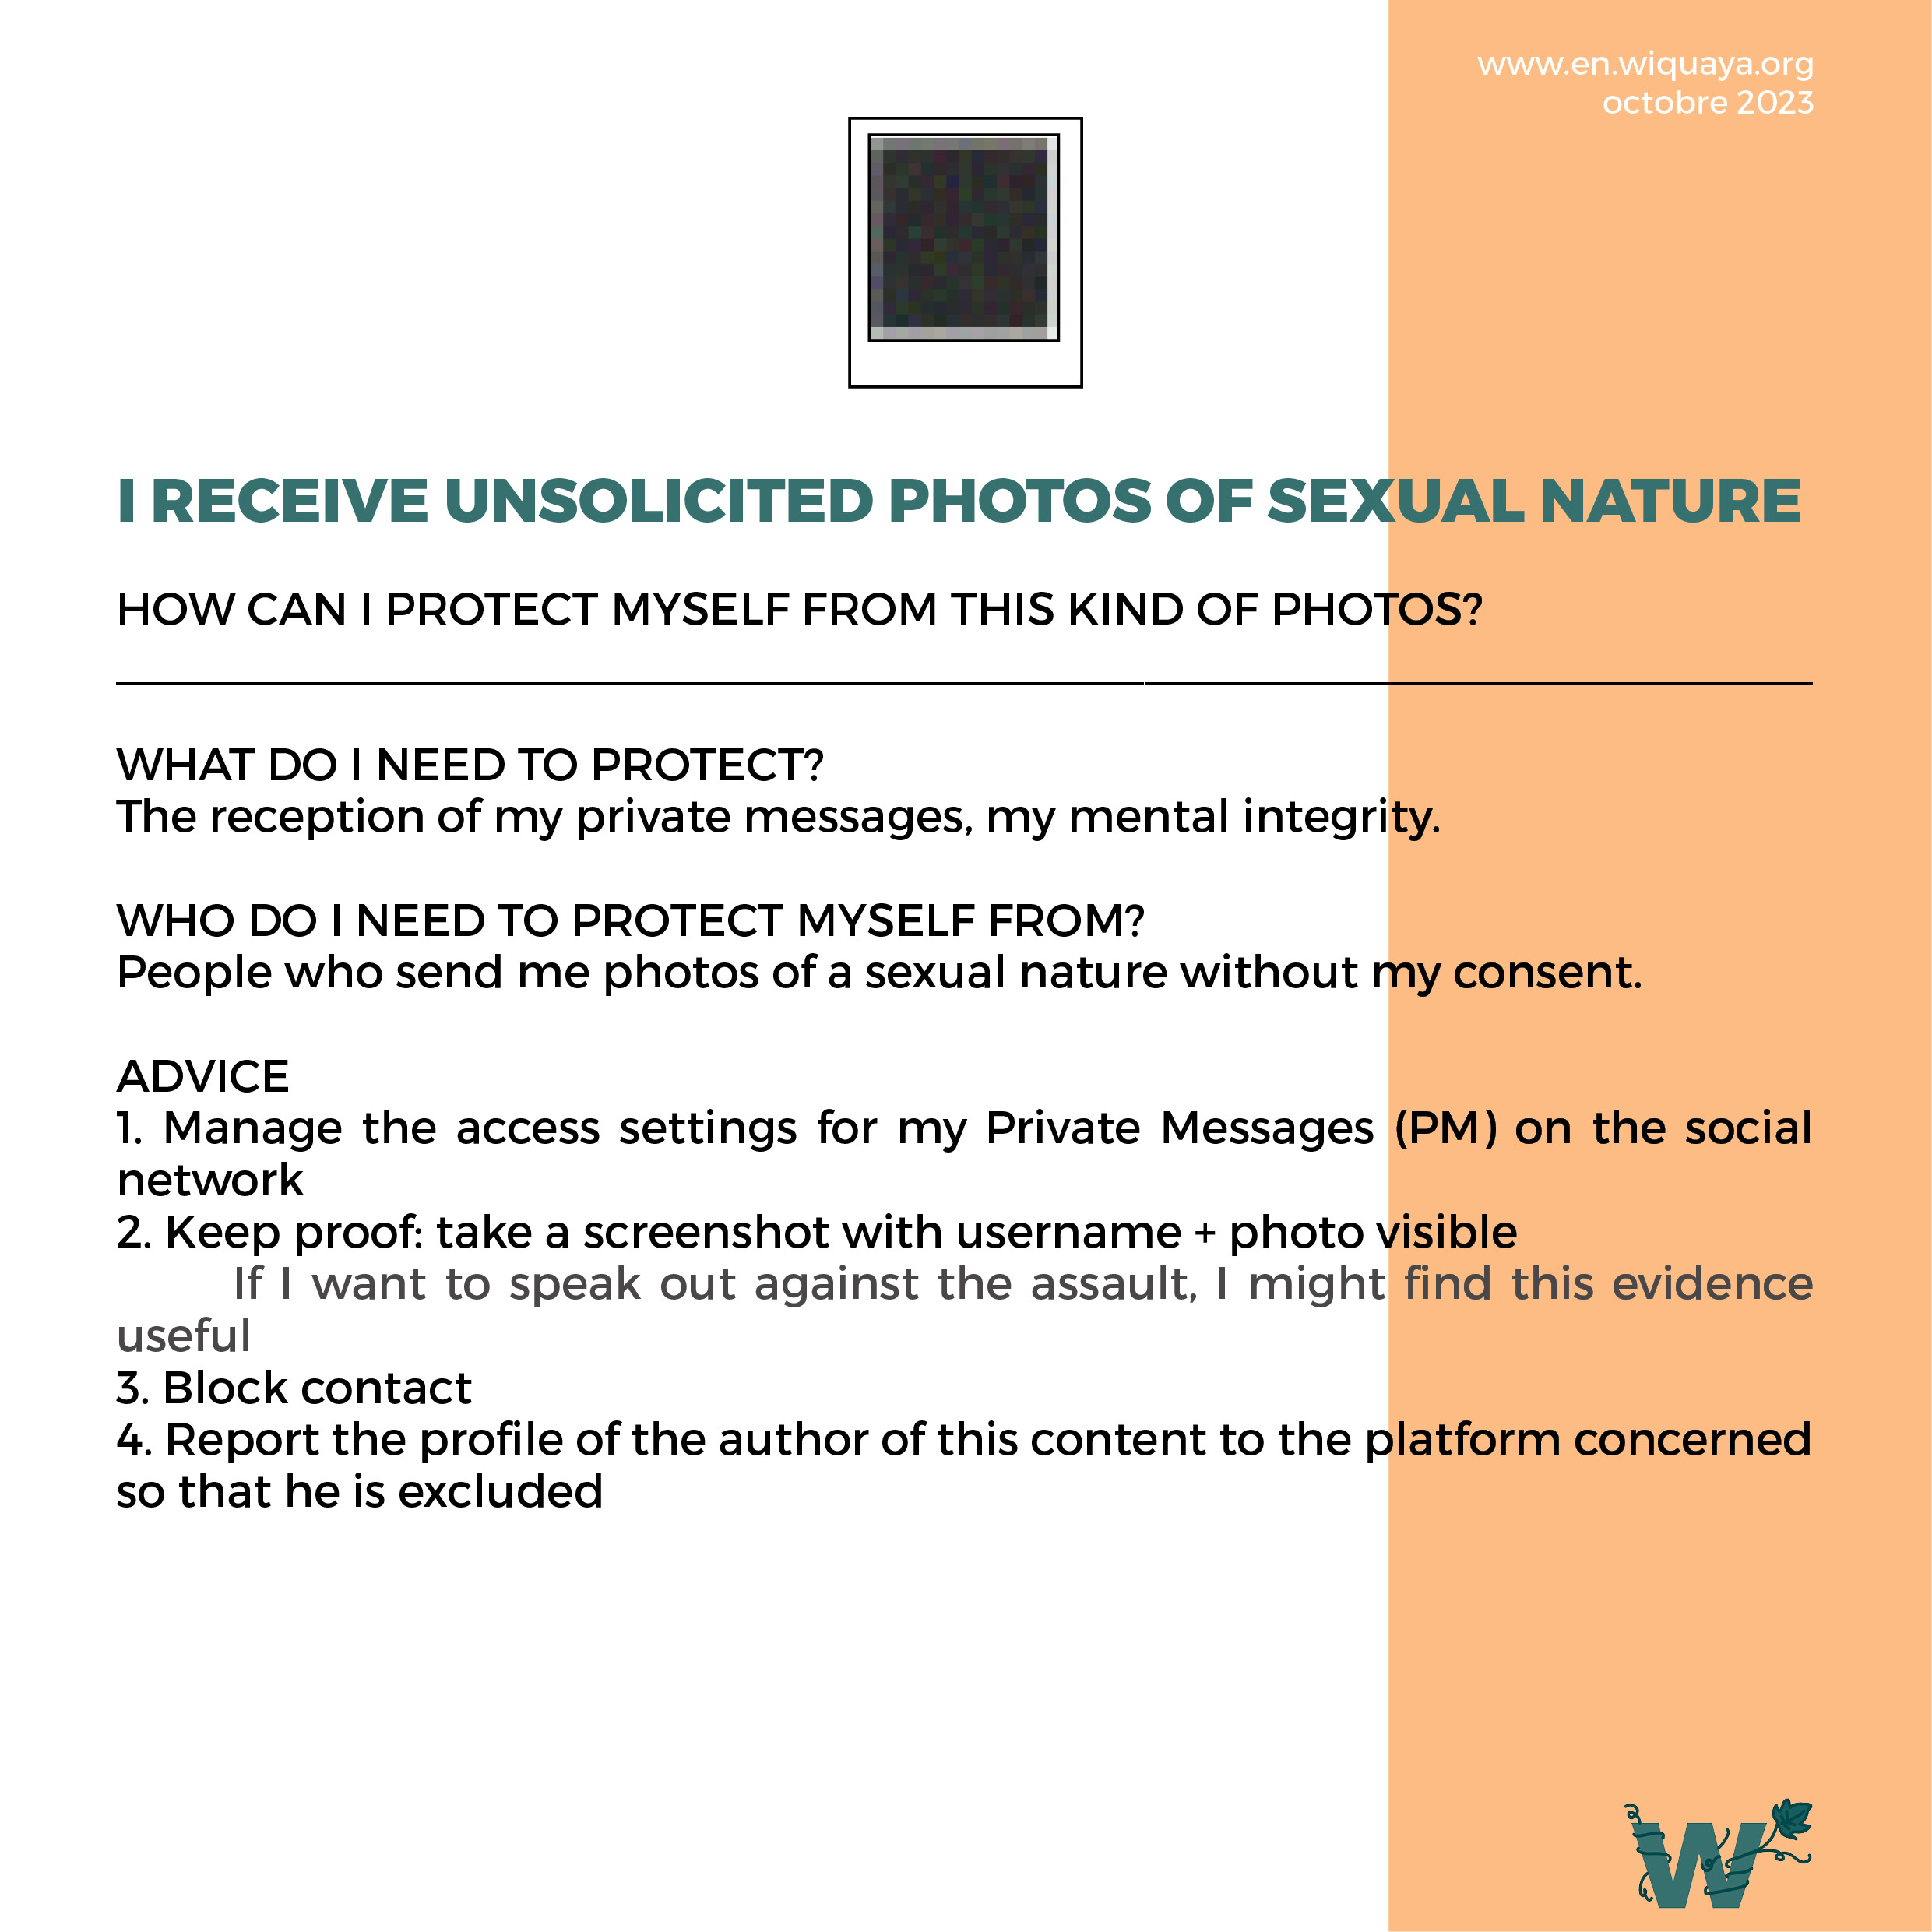 Help sheet I receive unsolicited photos of sexual nature